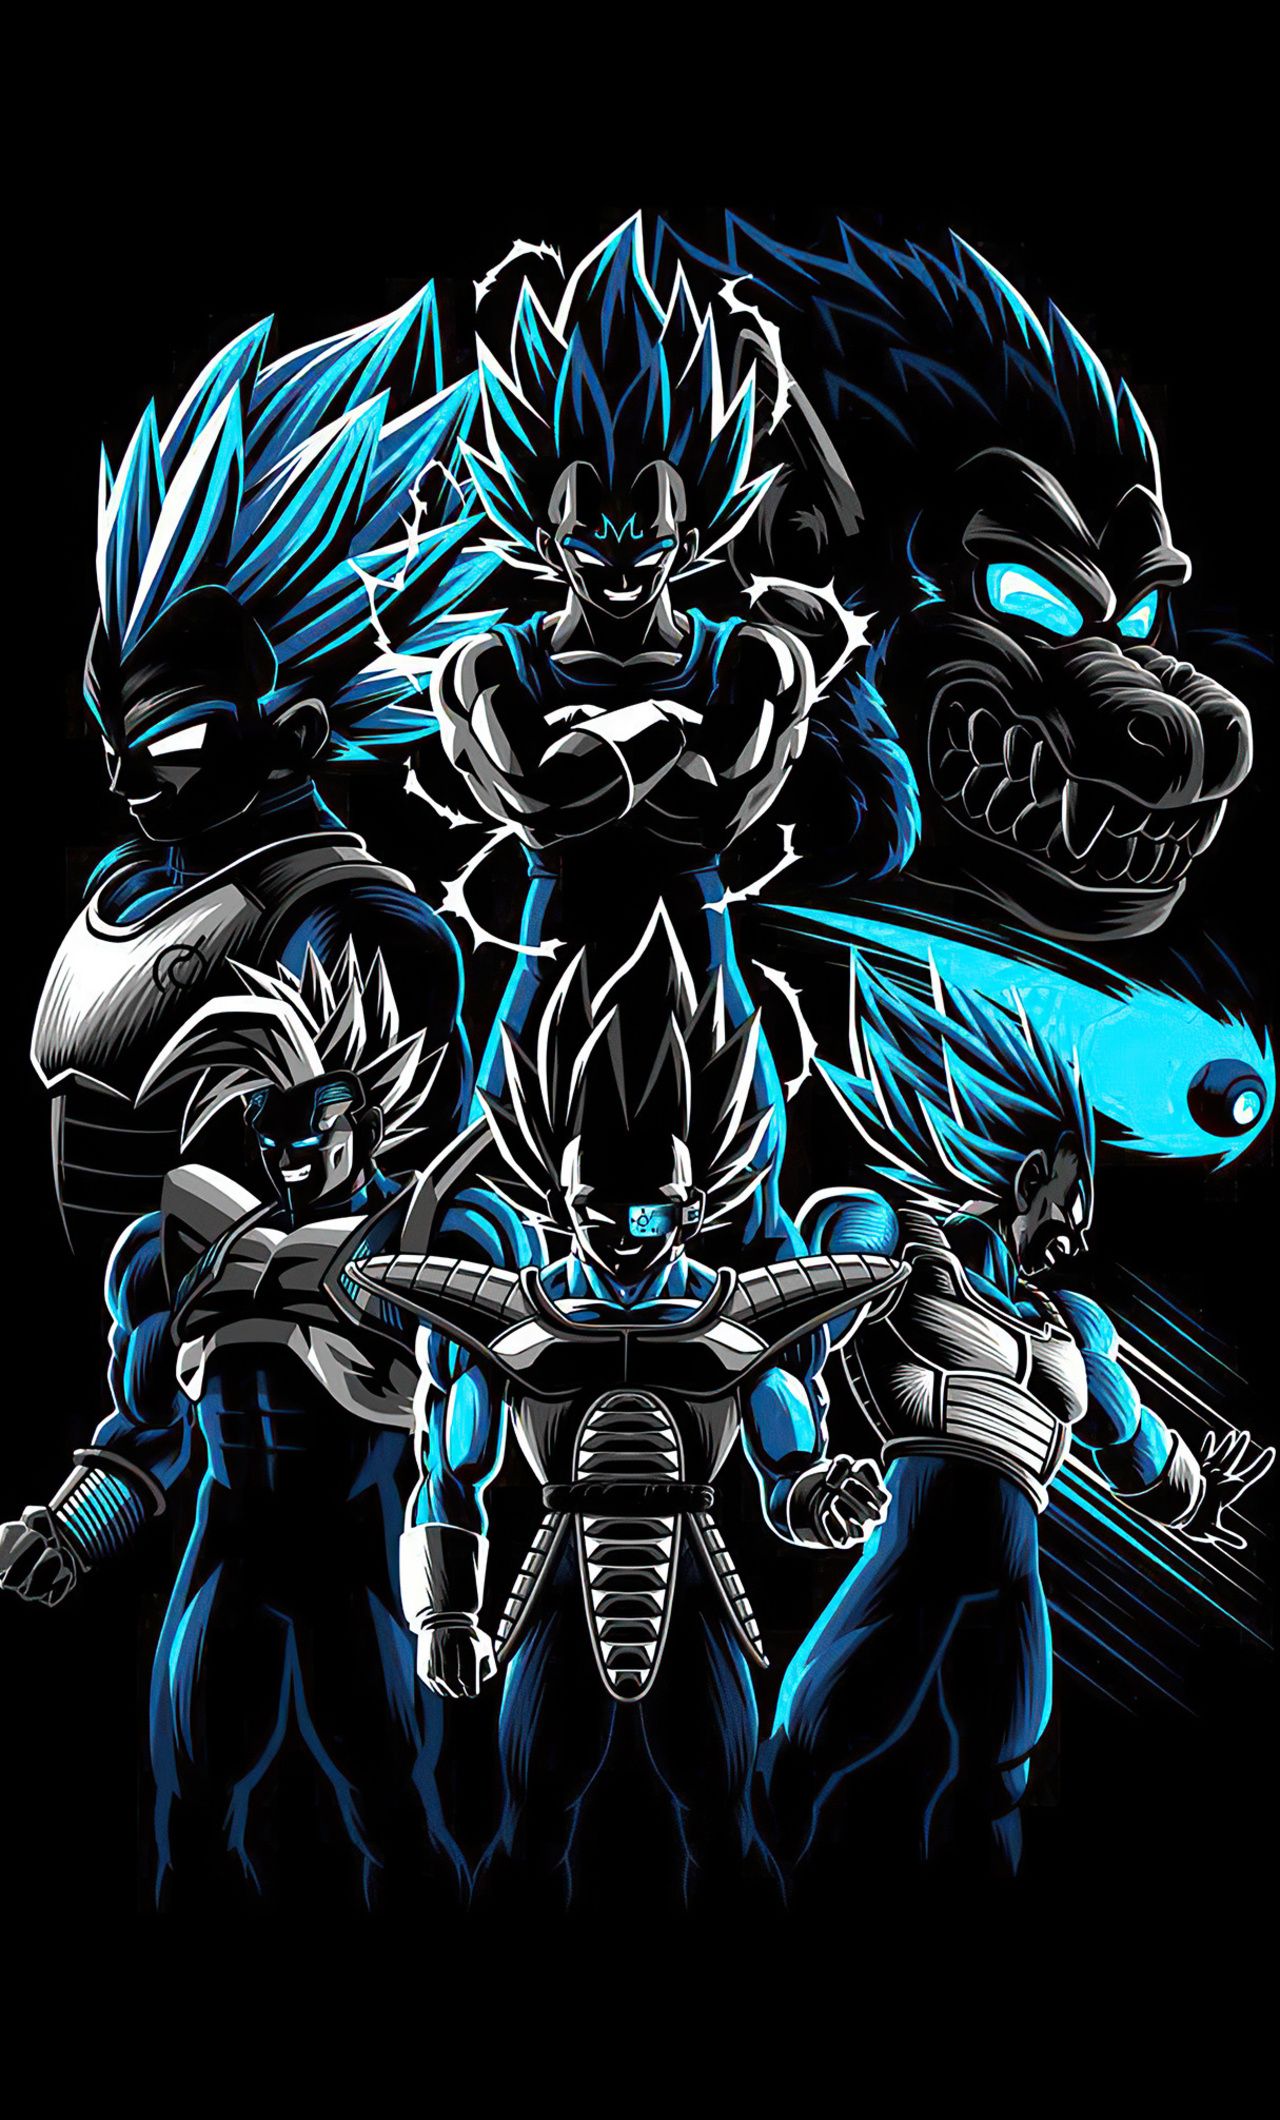 Dragon Ball Z IPhone Wallpaper and HD Background free download on PicGaGa